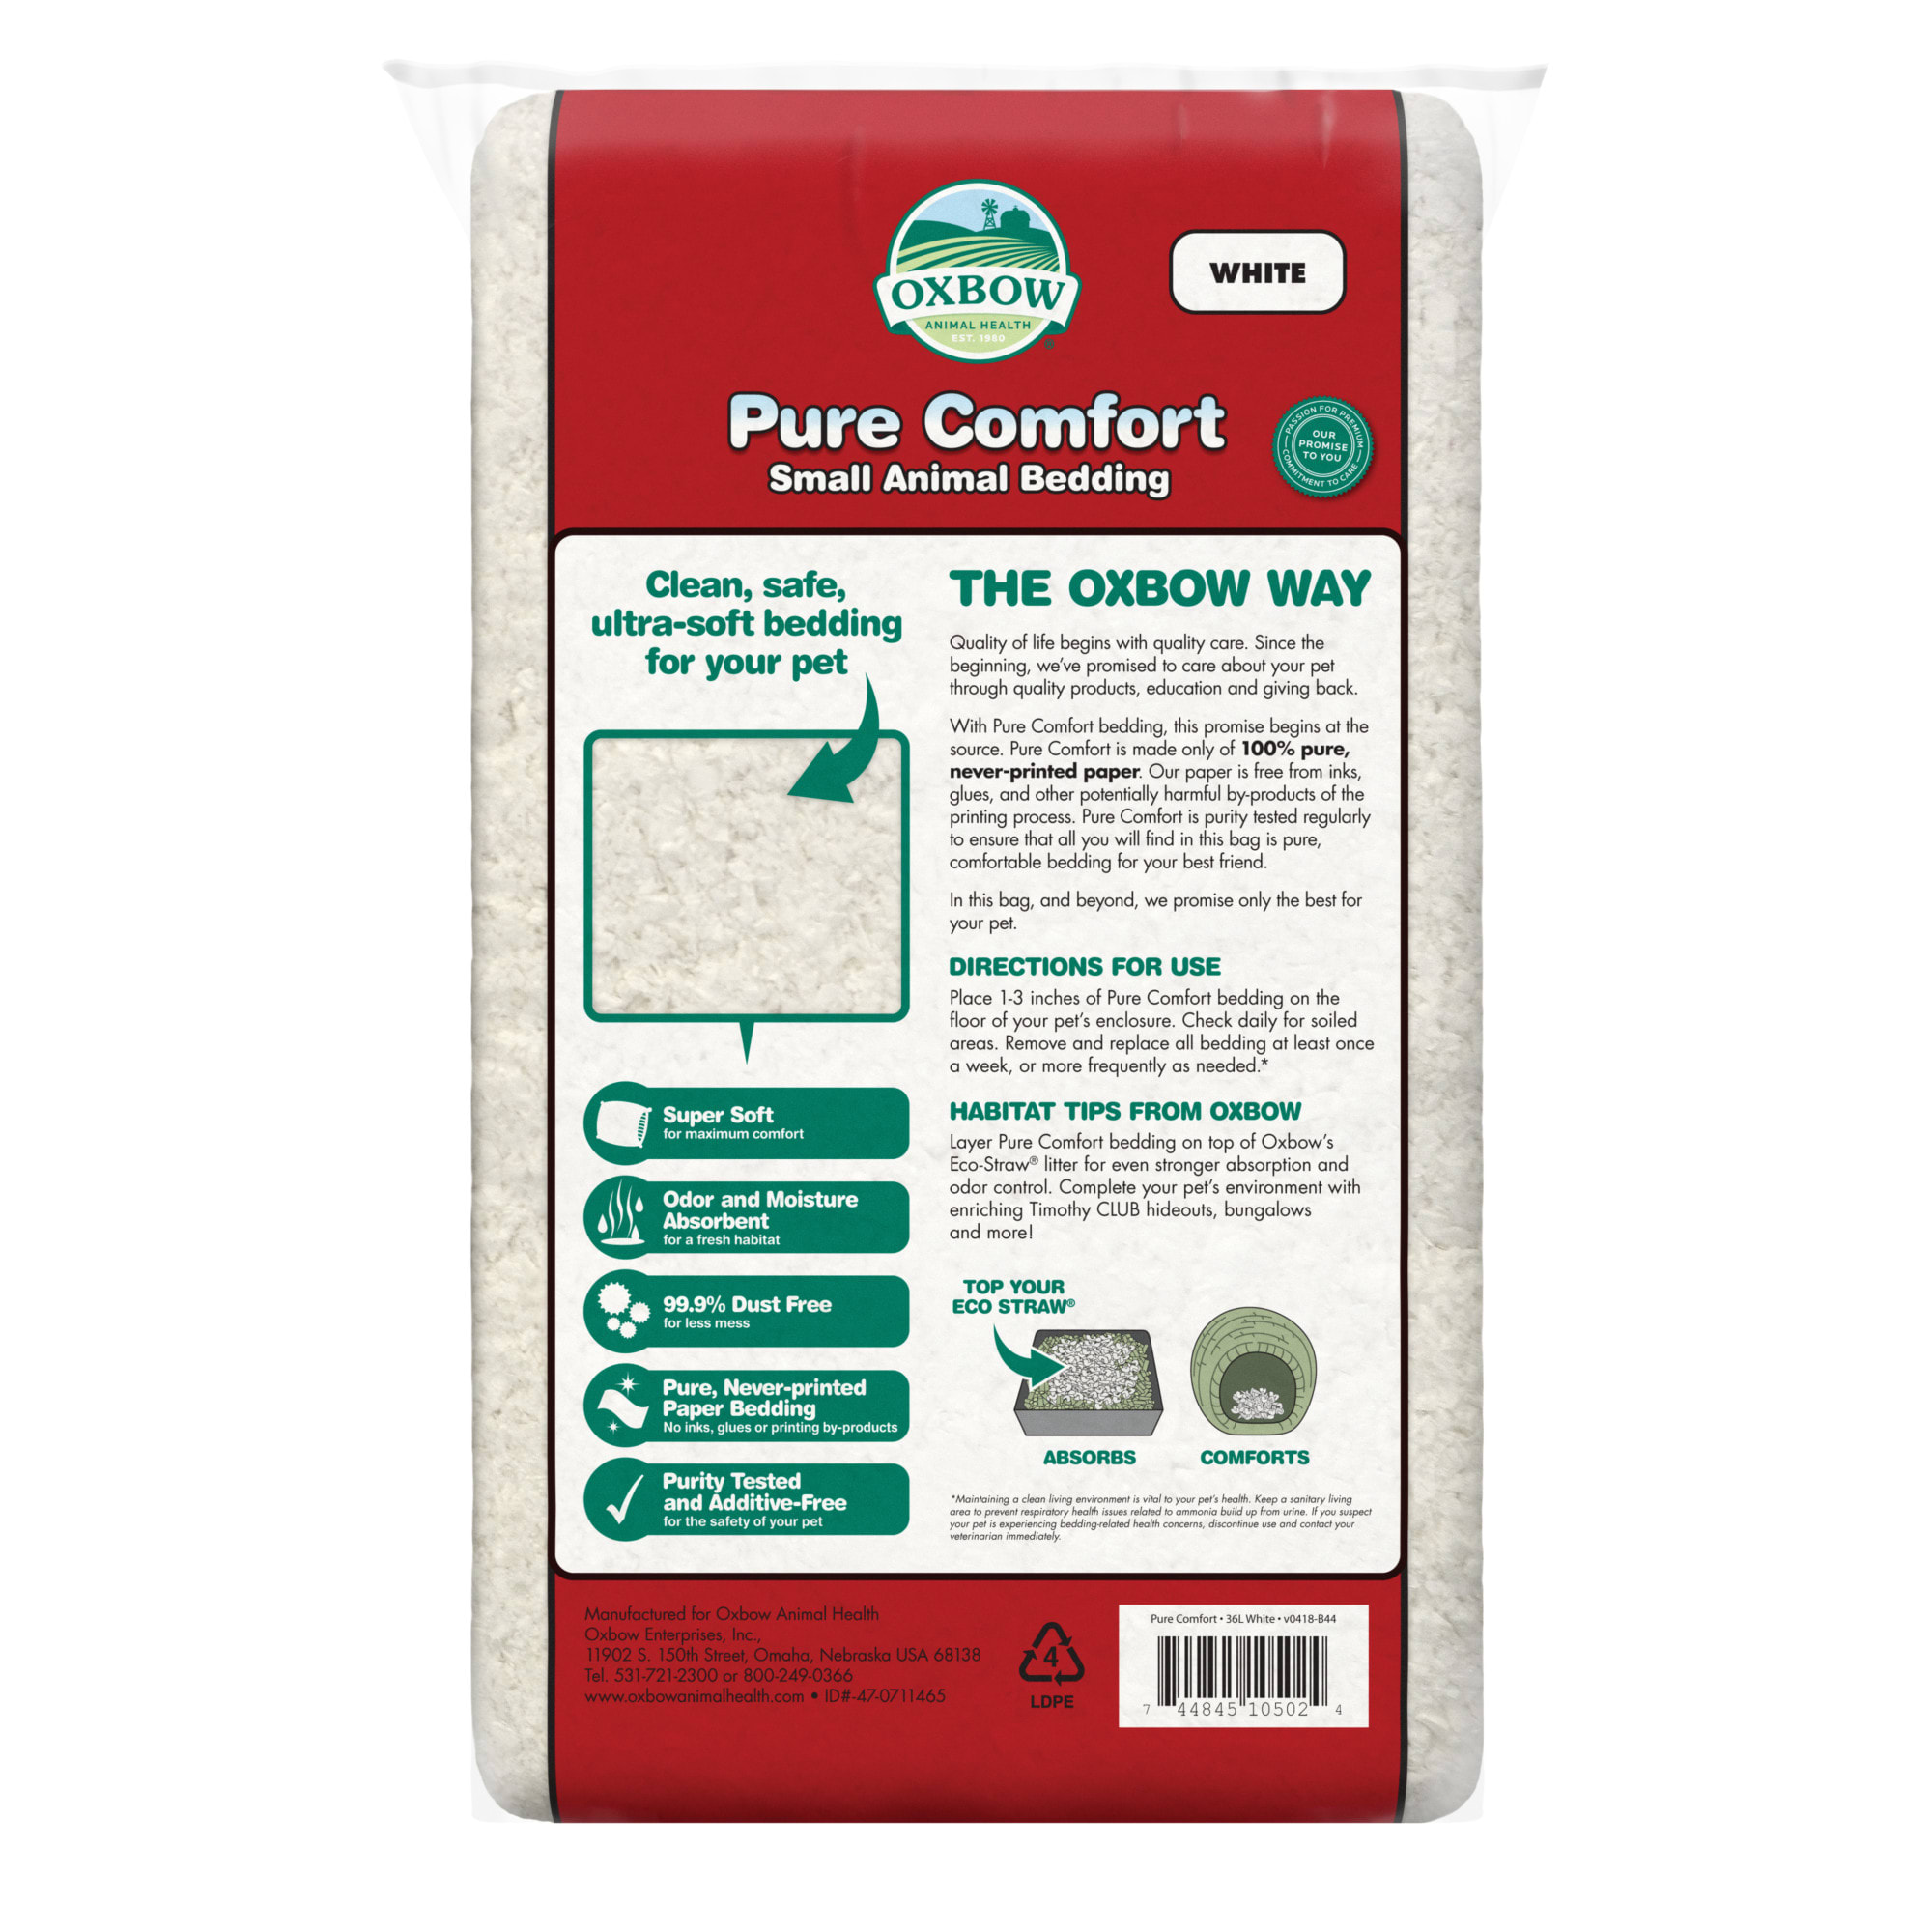 Oxbow Pure Comfort White Bedding, 72 Litre